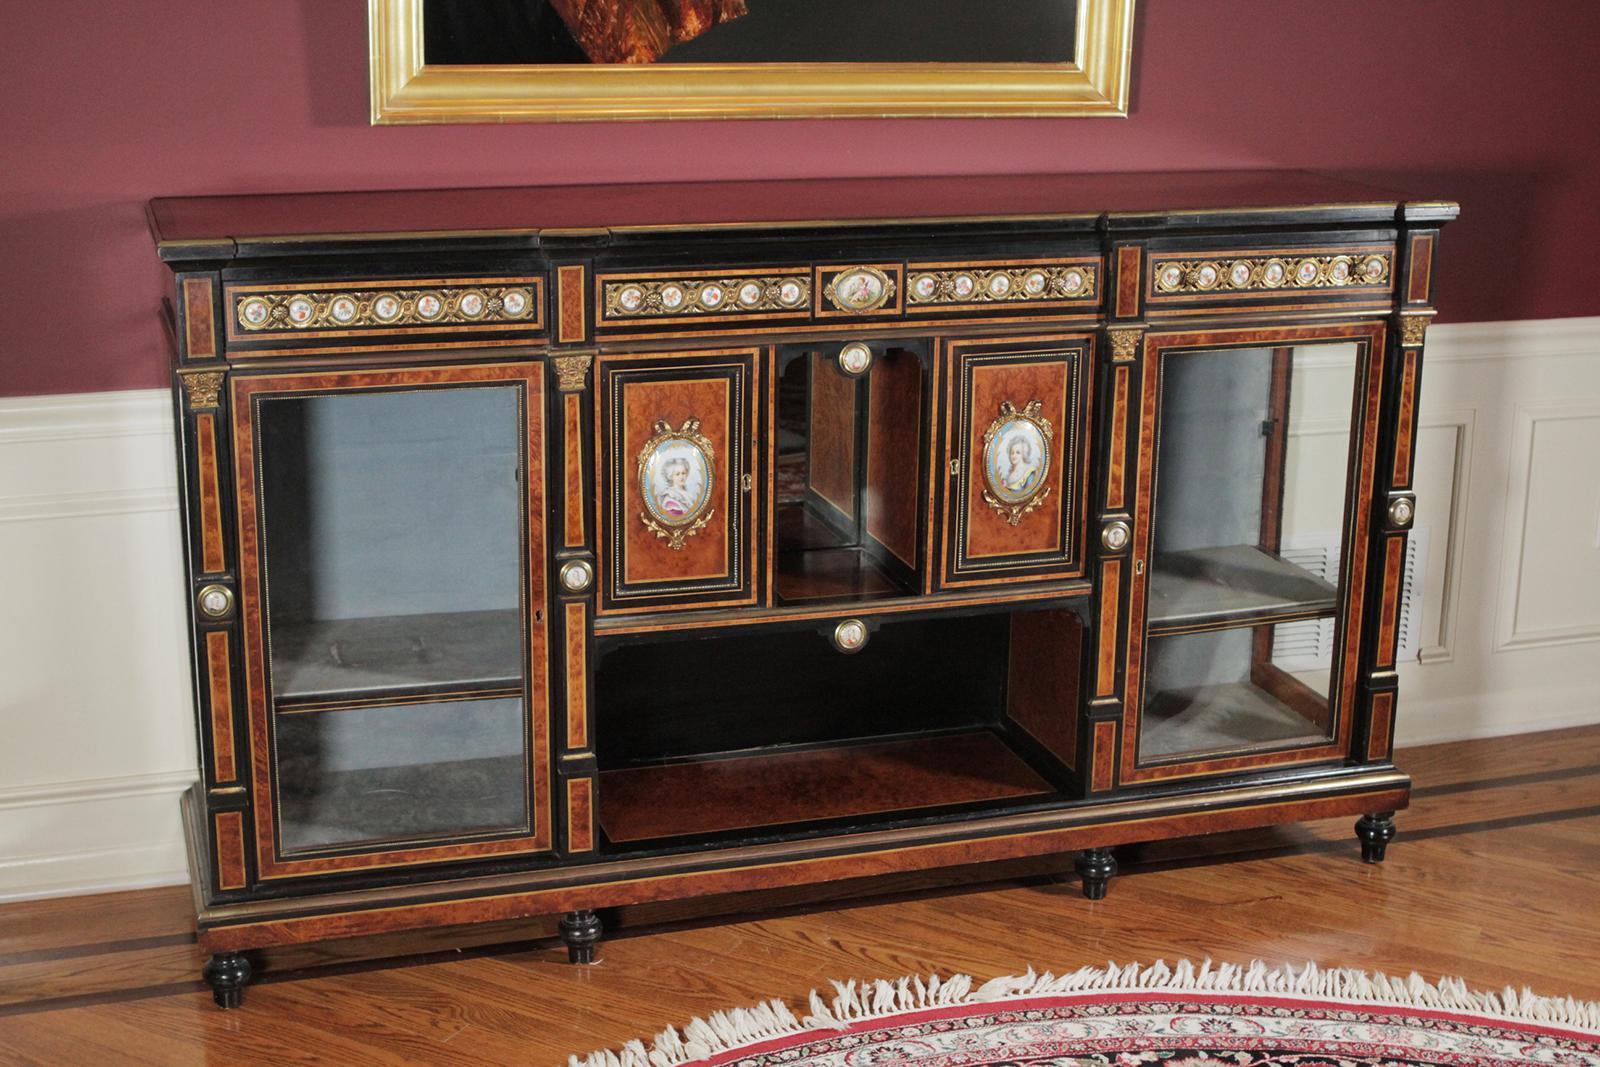 A burl walnut and ebony credenza sideboard with bronze and porcelain mounts. The burl walnut framed in ebony with ormolu mounts and hand-painted porcelain plaques on the doors and aprons. The front with two glazed doors on each side with open and